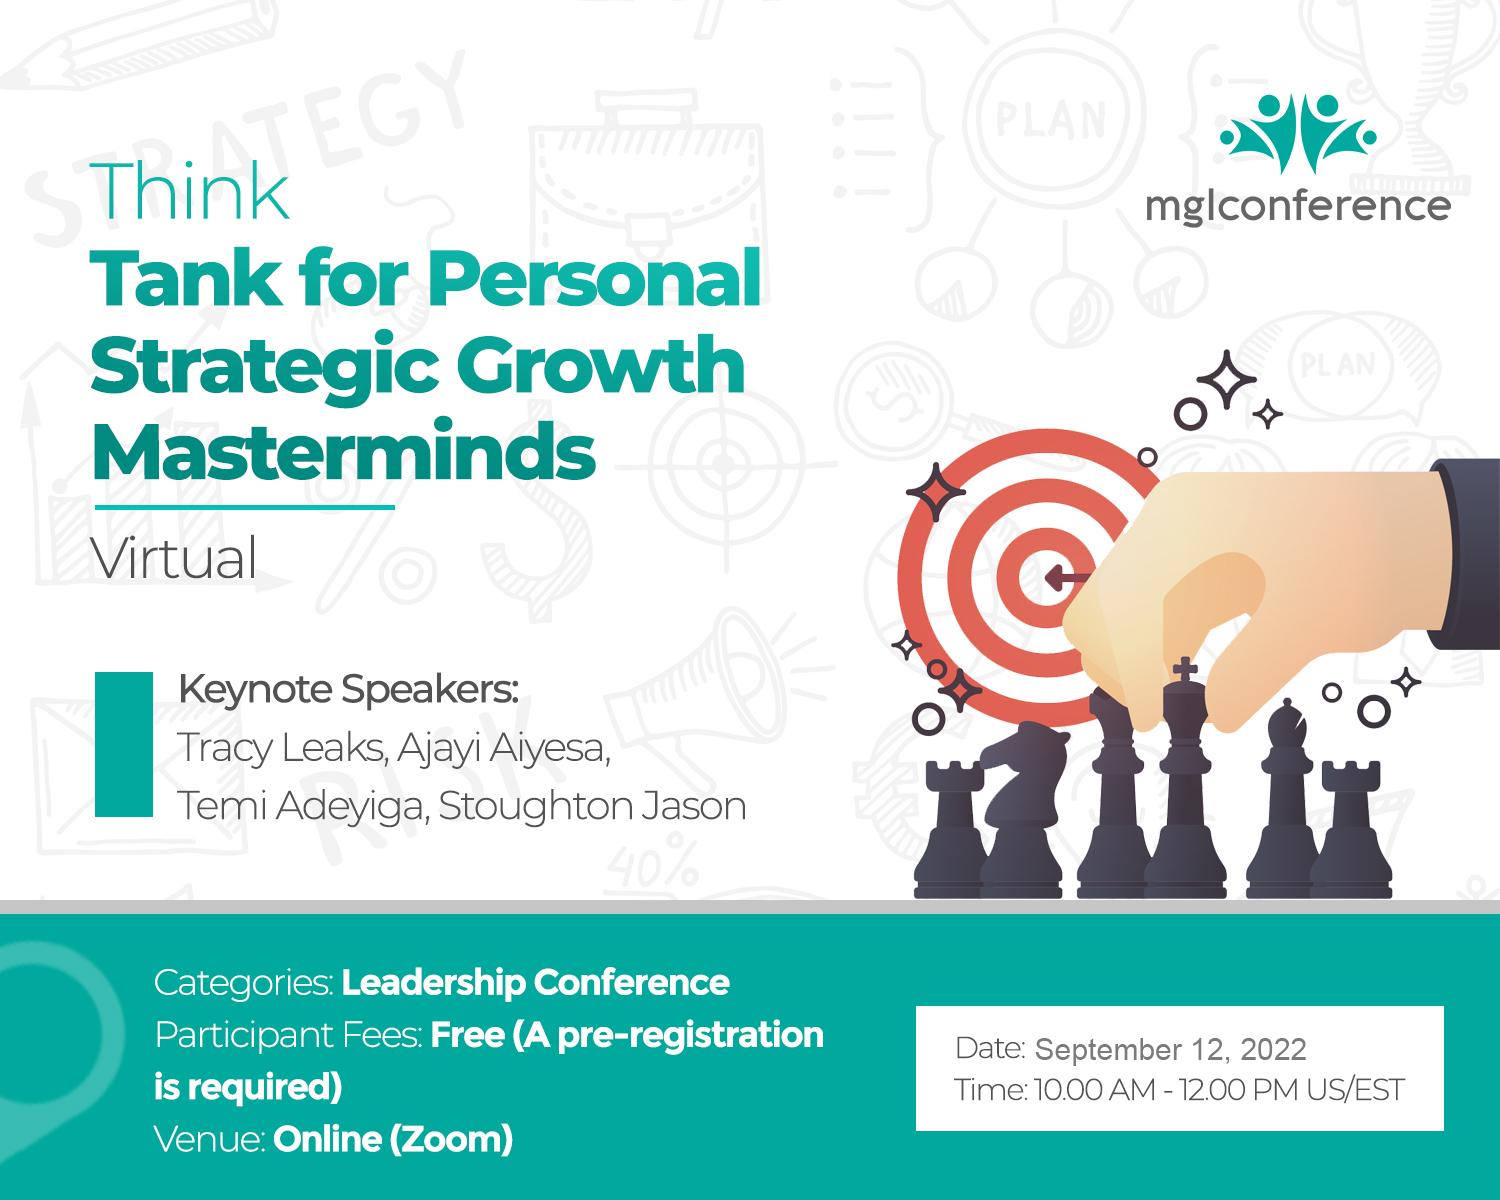 Think Tank for Personal Strategic Growth Masterminds (Virtual)